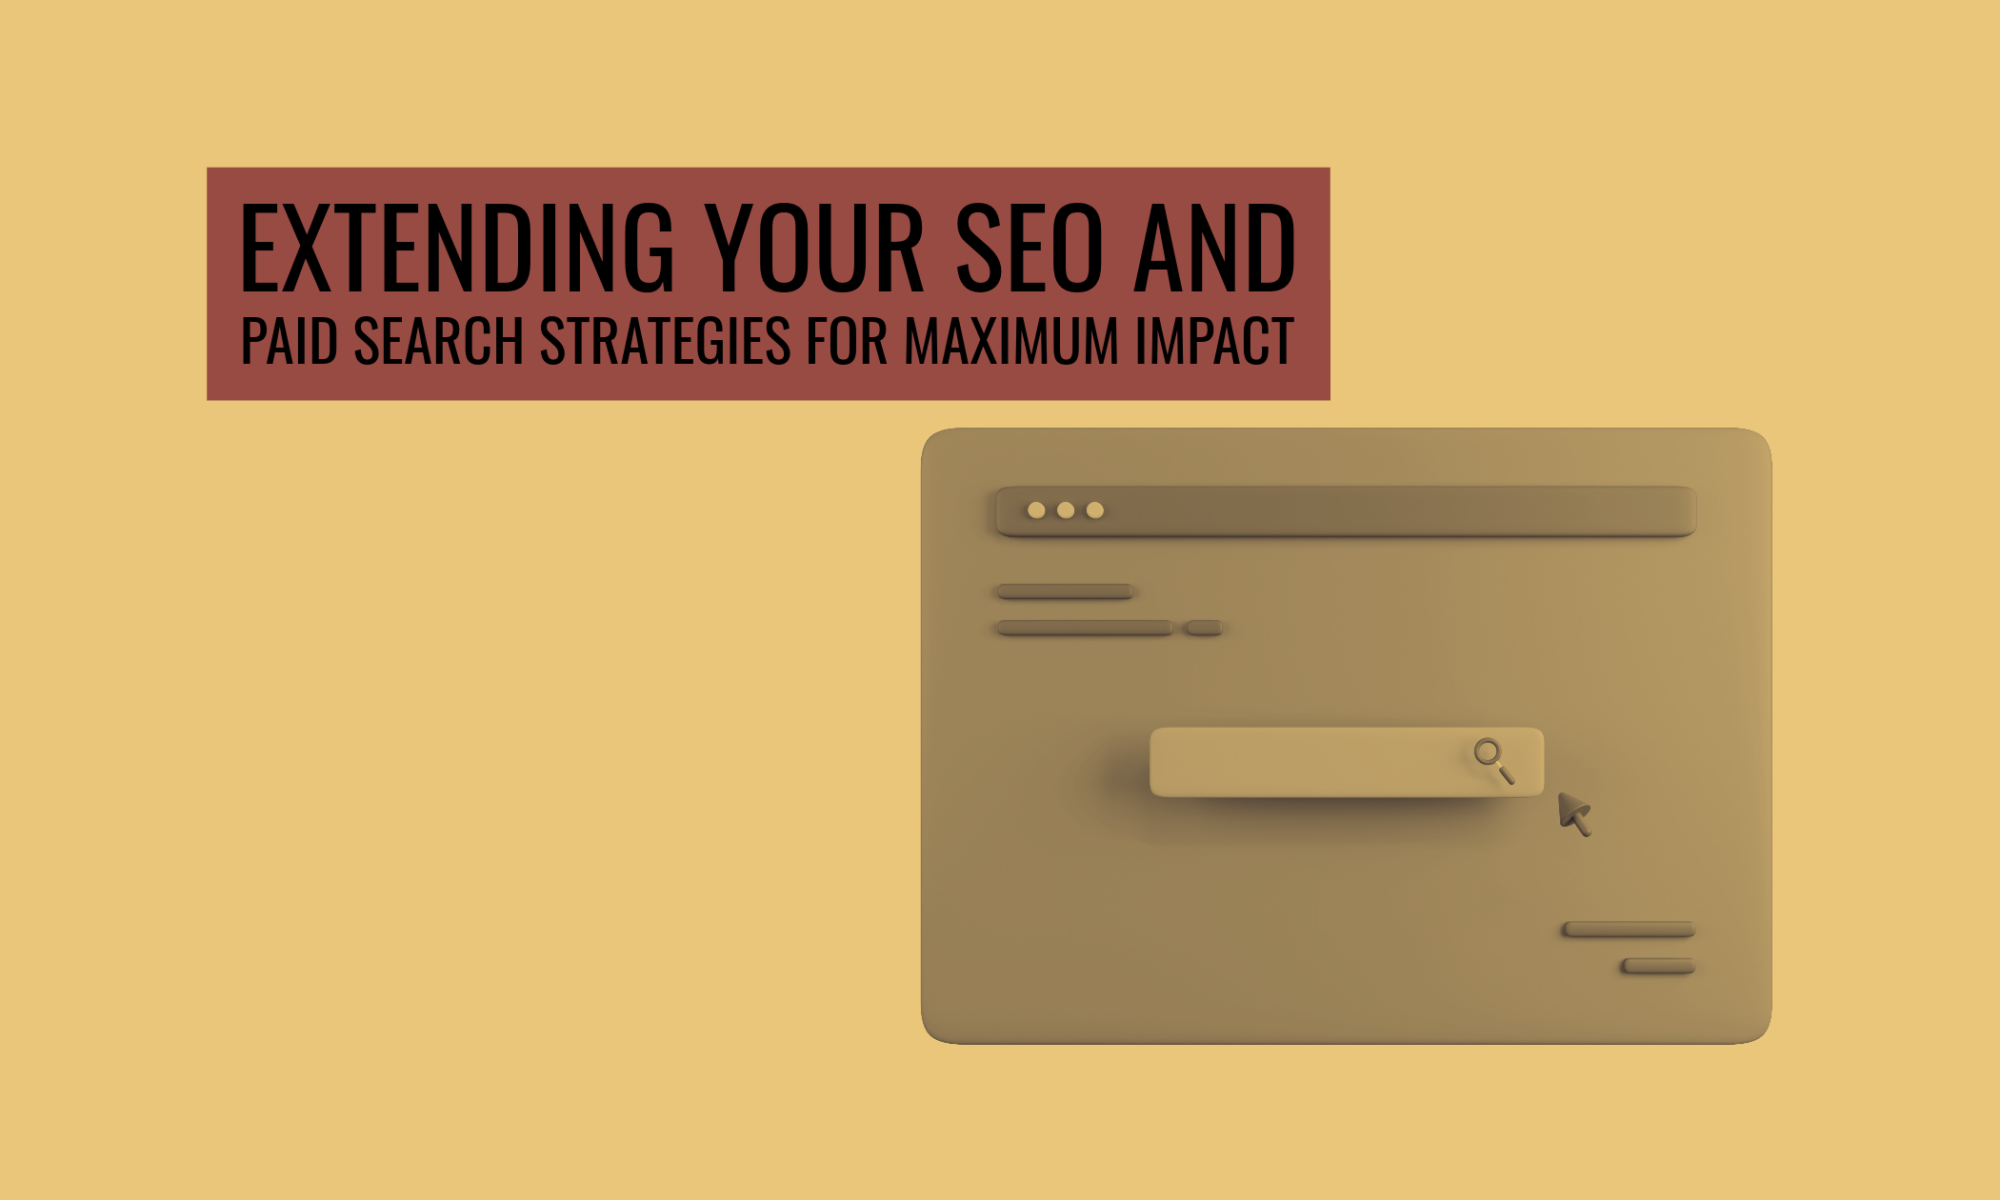 Extending Your SEO and Paid Search Strategies for Maximum Impact